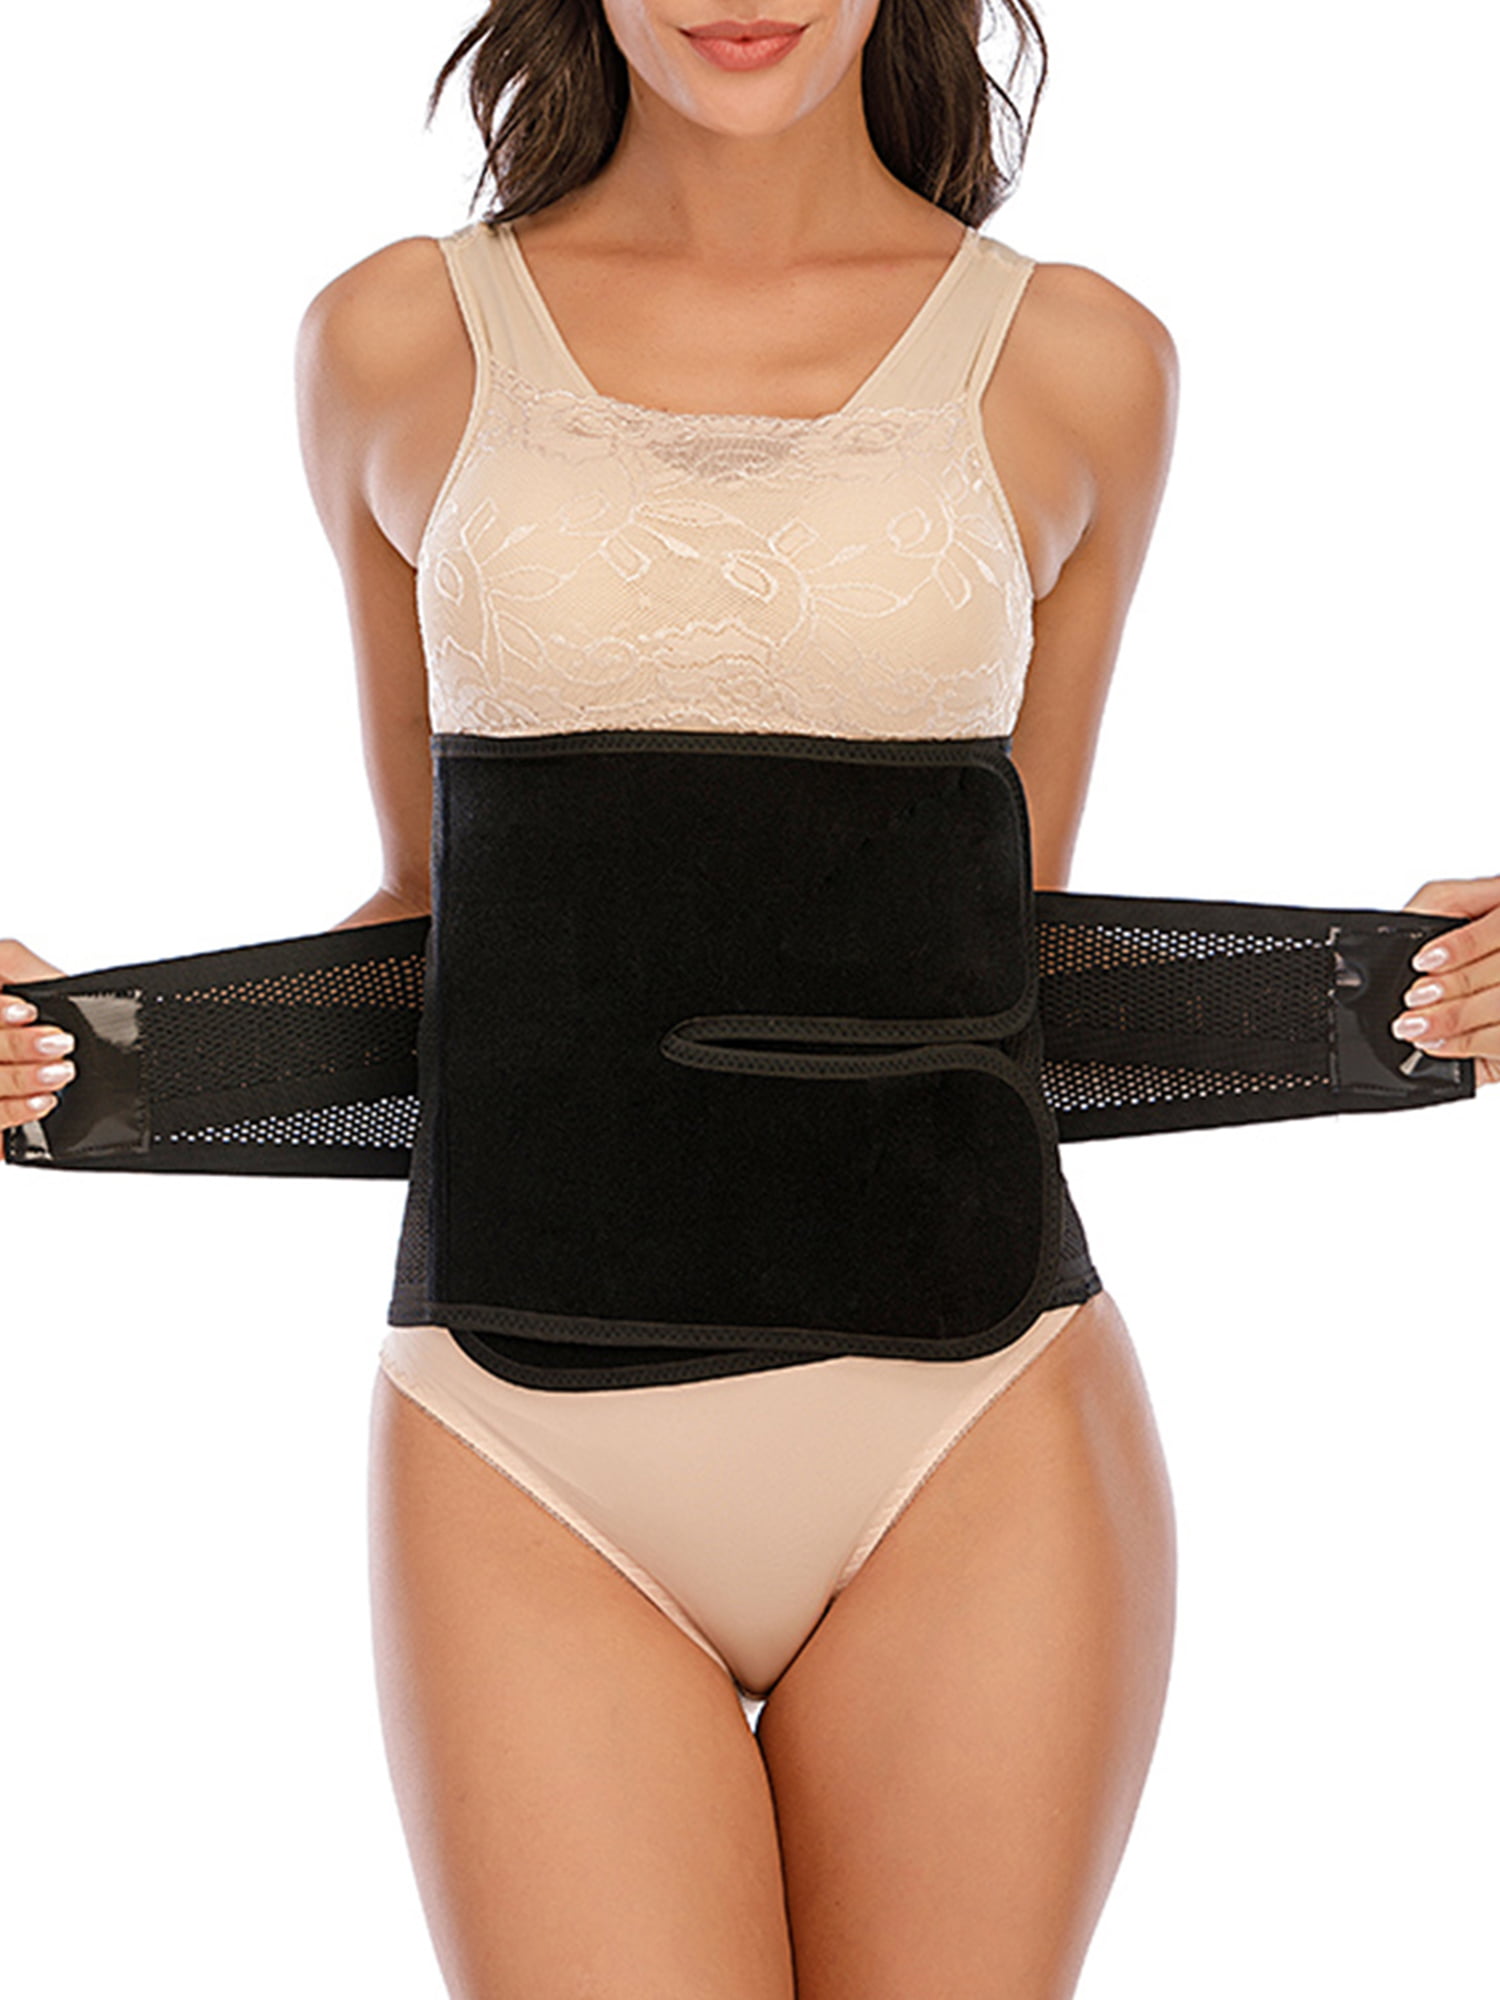 Women Abdominal Compression Board PostPartum Surgery Waist Trainer Recovery US